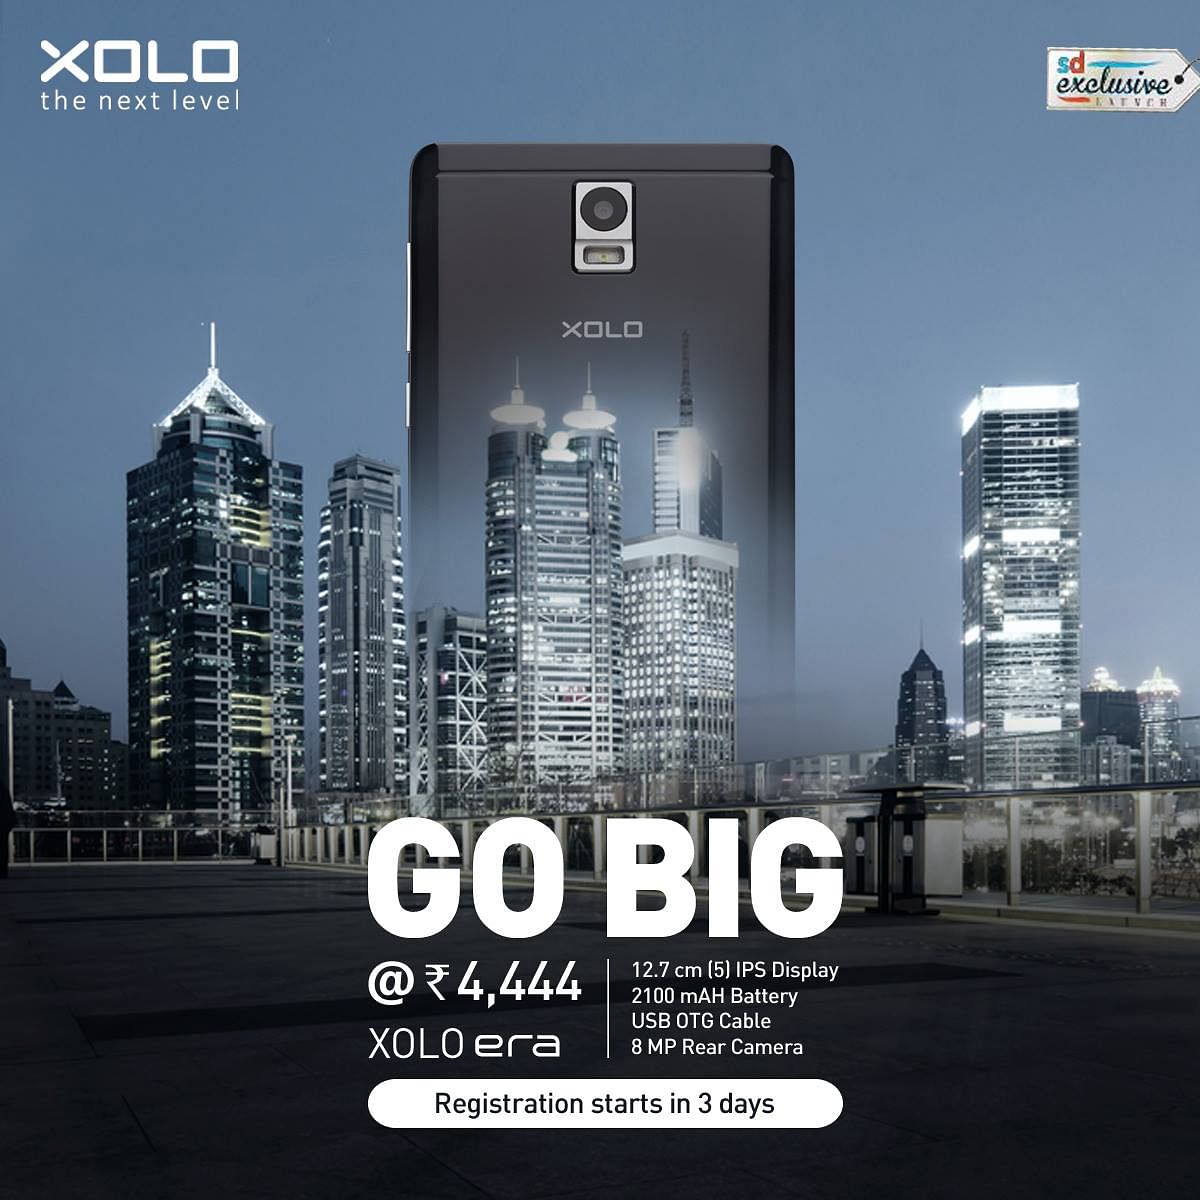 Another budget smartphone called Era by Xolo in India.